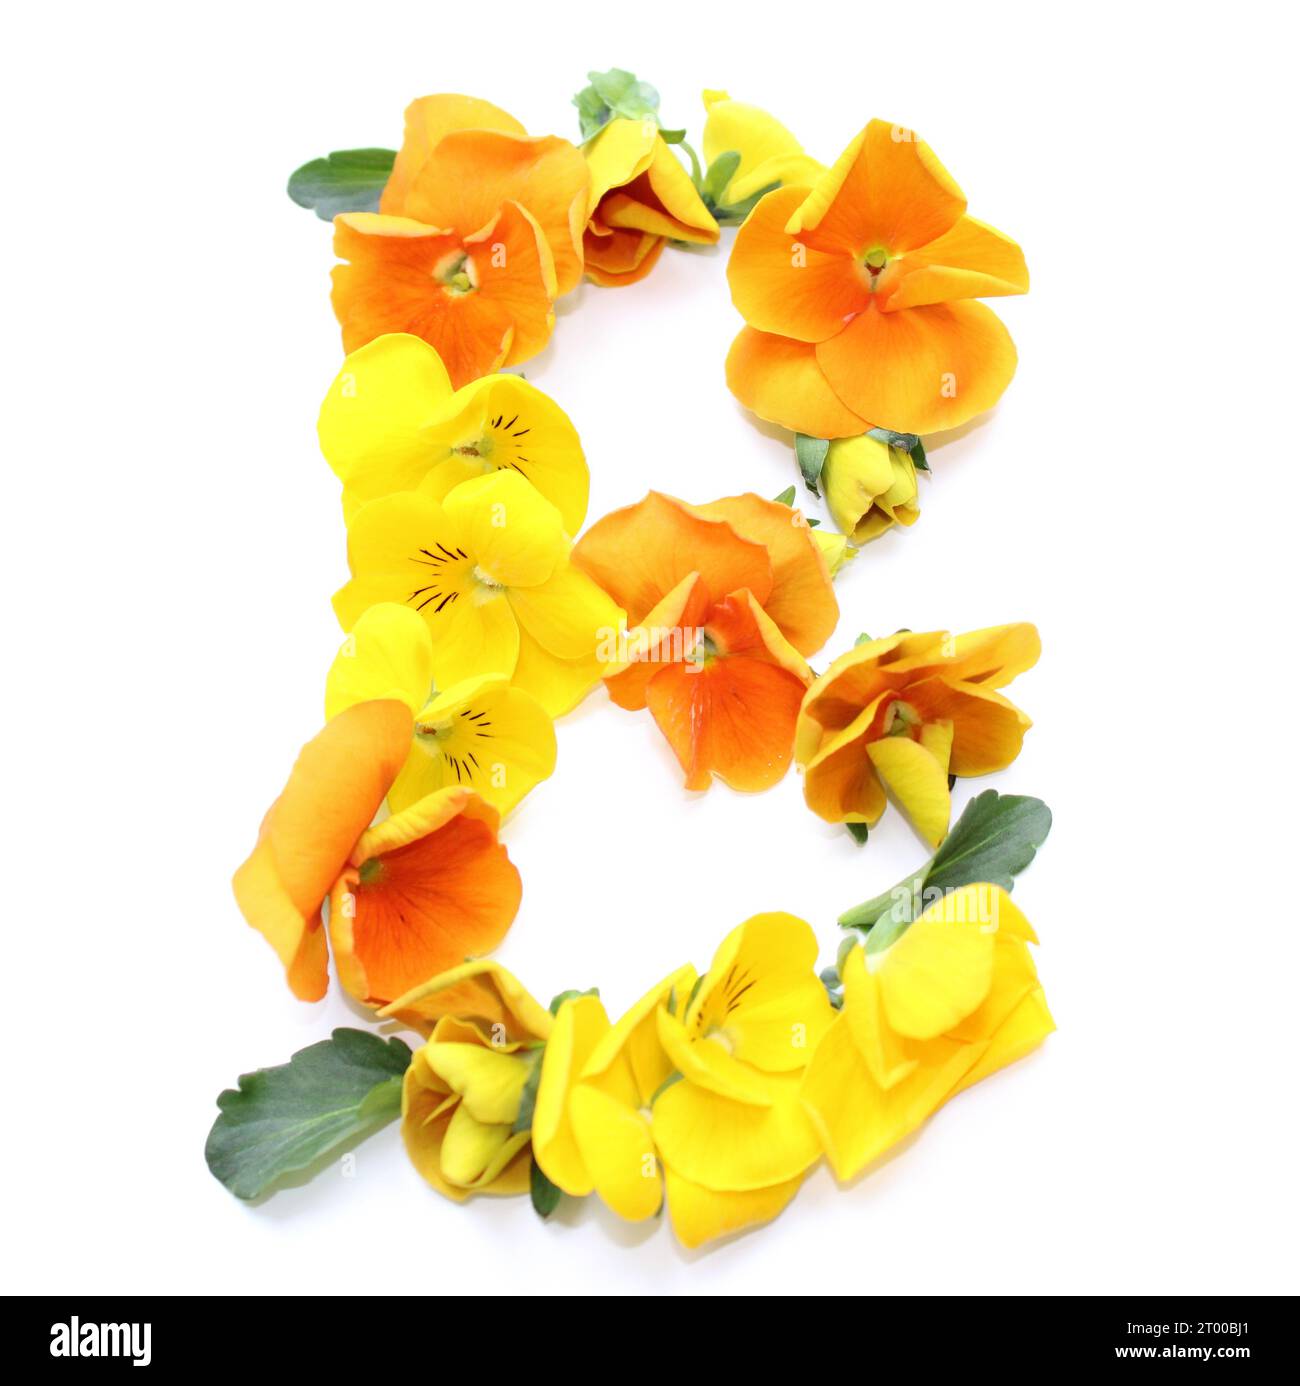 B, natural flower arrangements with orange yellow real fresh flowers combined letter alphabet for Mother's Valentine's Day Wedding Thank you cards Stock Photo